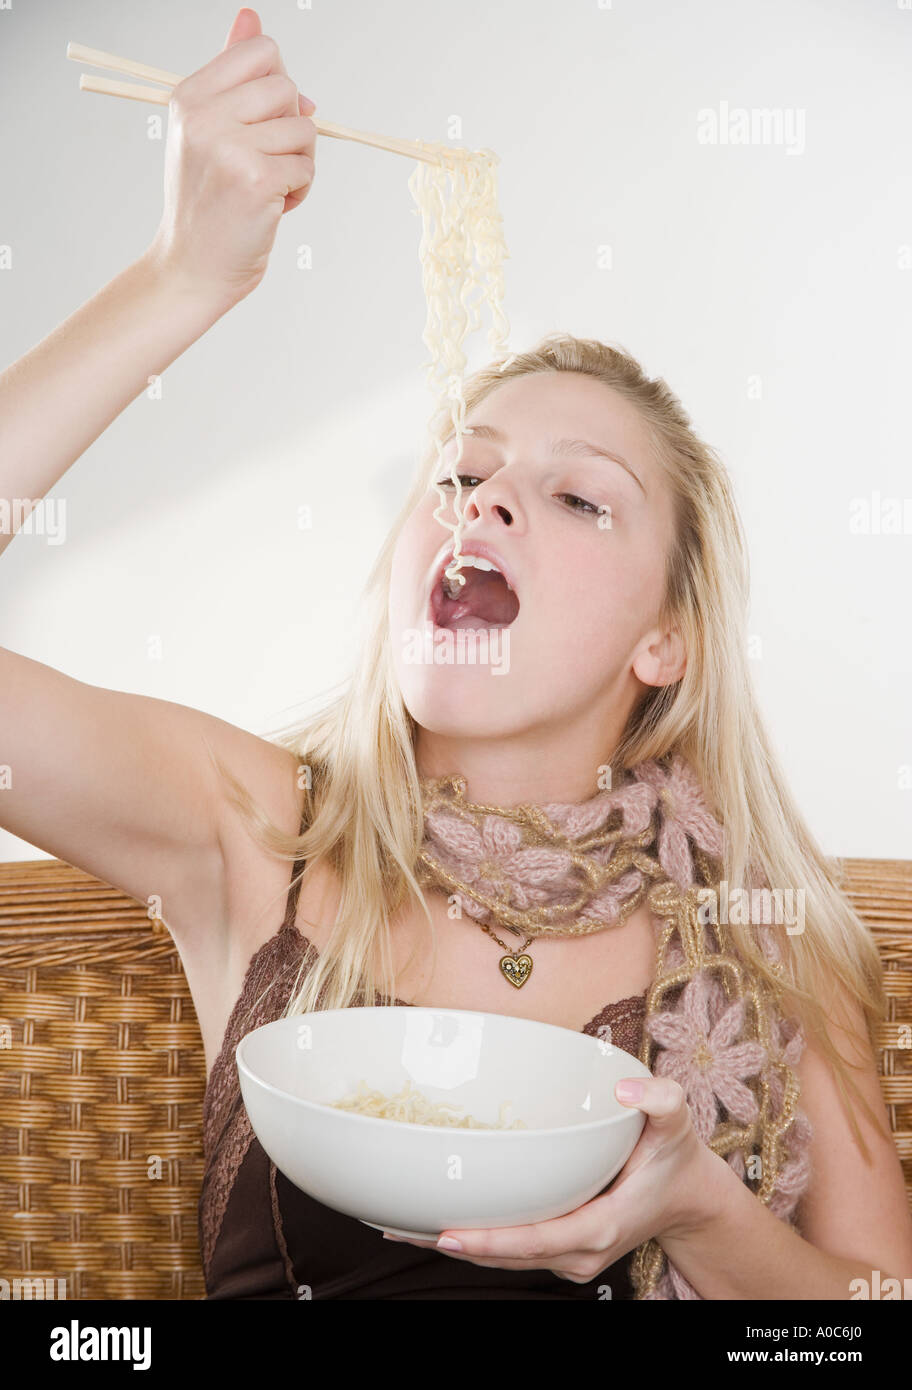 Woman eating noodles Stock Photo